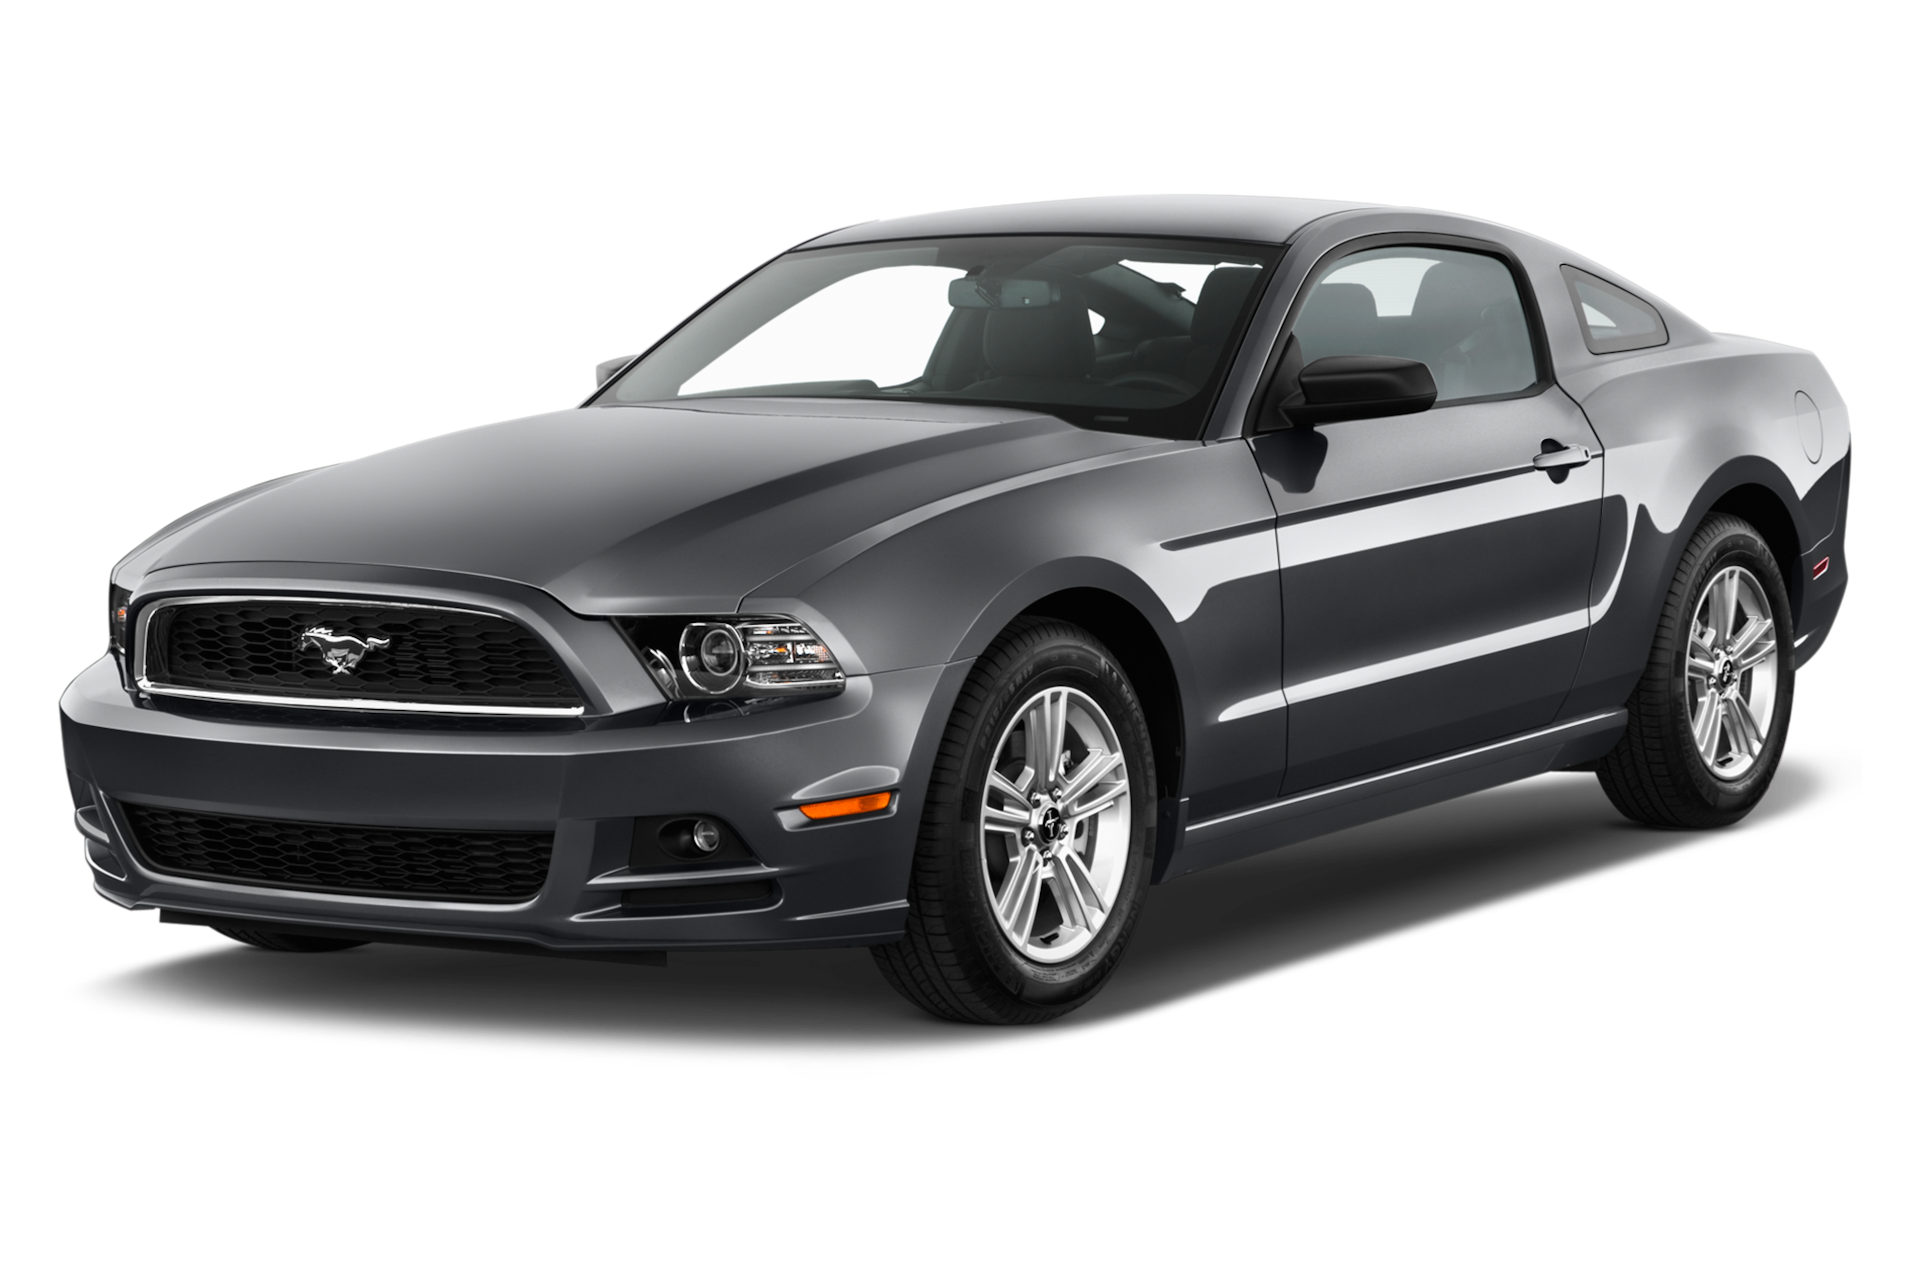 2014 Ford Mustang Prices, Reviews, and Photos - MotorTrend